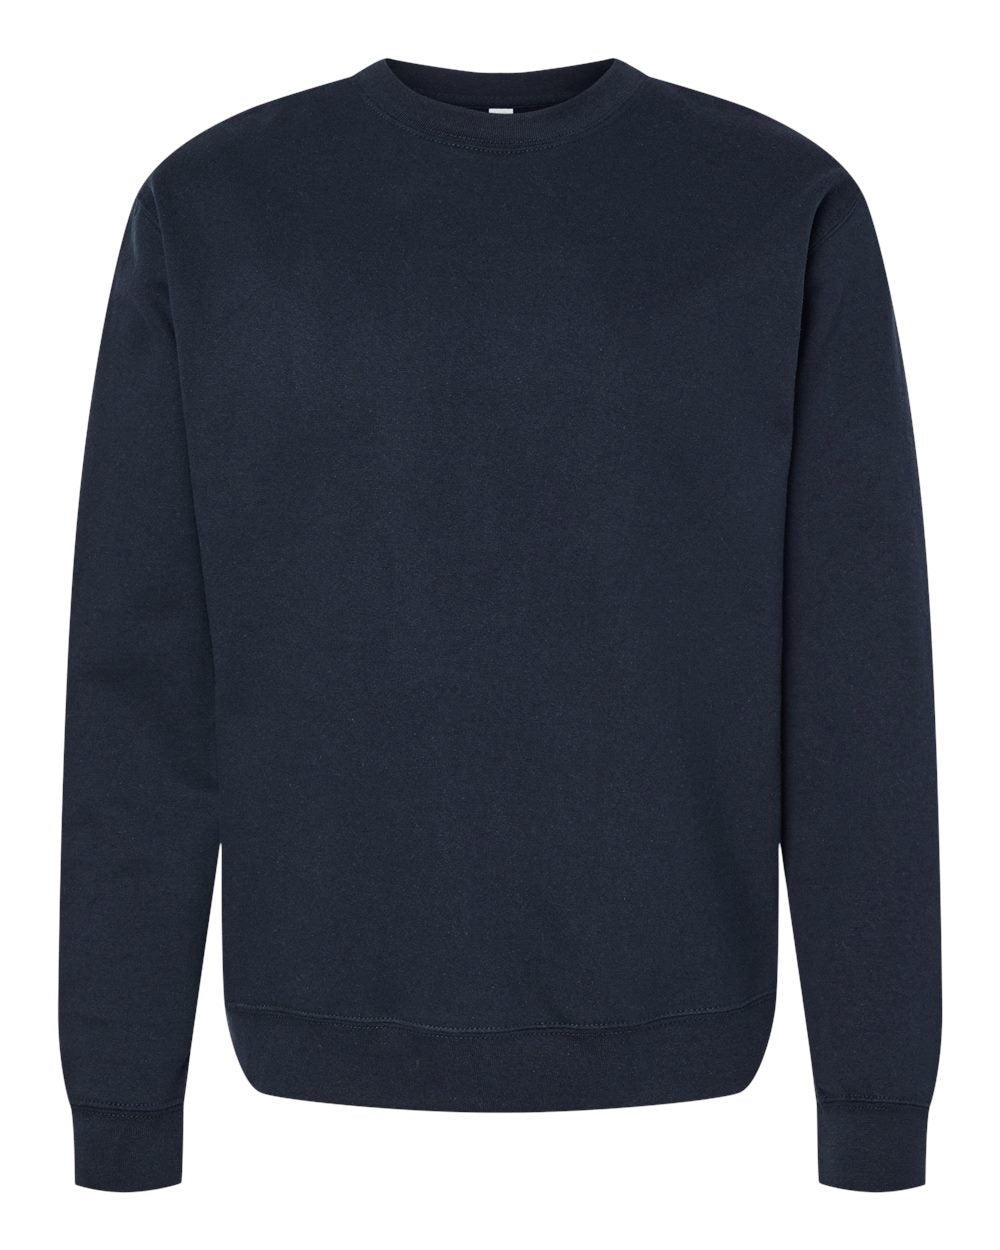 Pretreated Independent Trading Co. SS3000 Midweight Sweatshirt